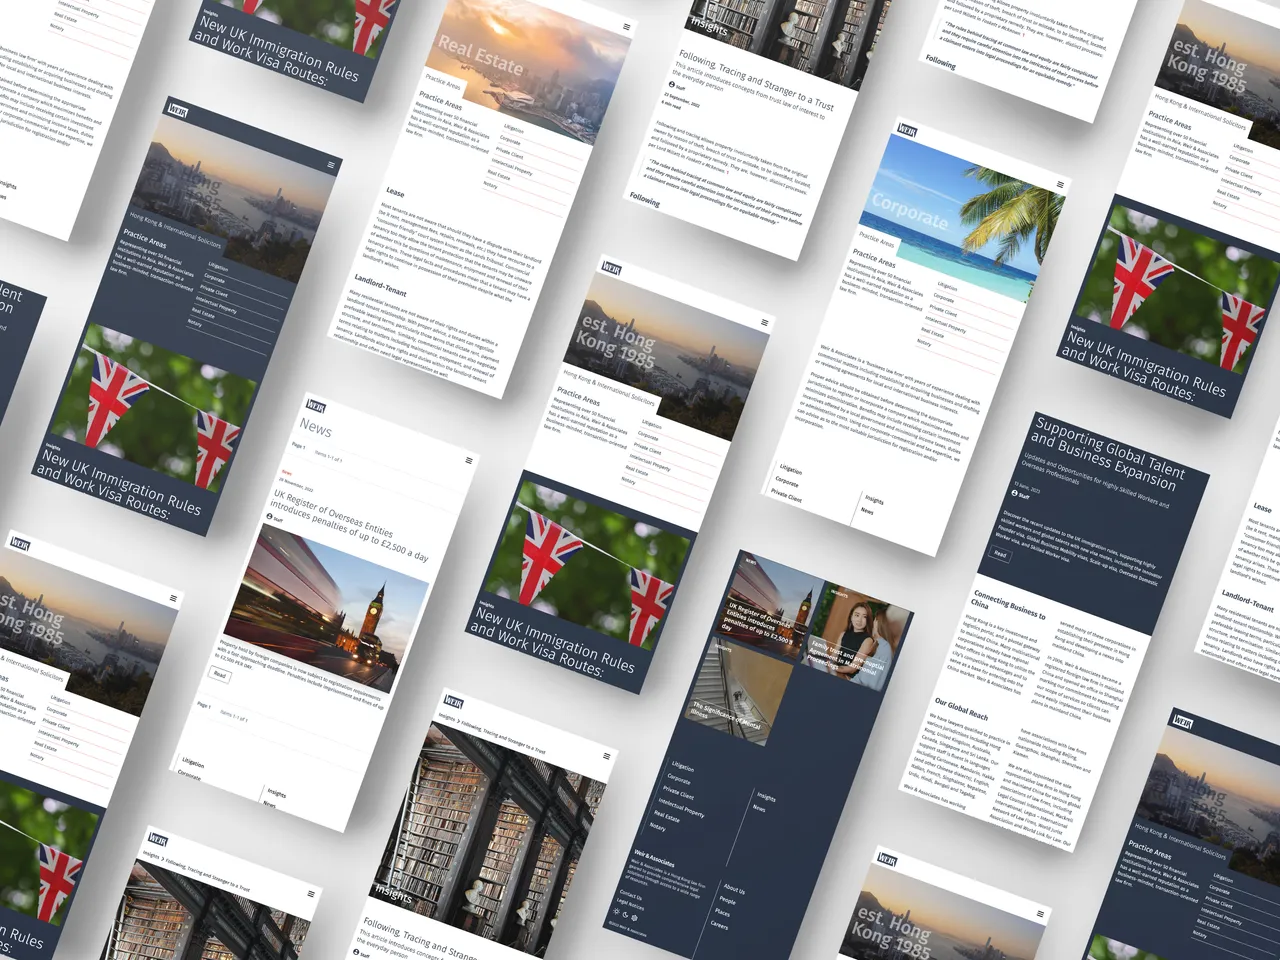 Mockup of mobile screens from new Weir & Associates website, displayed at an angle